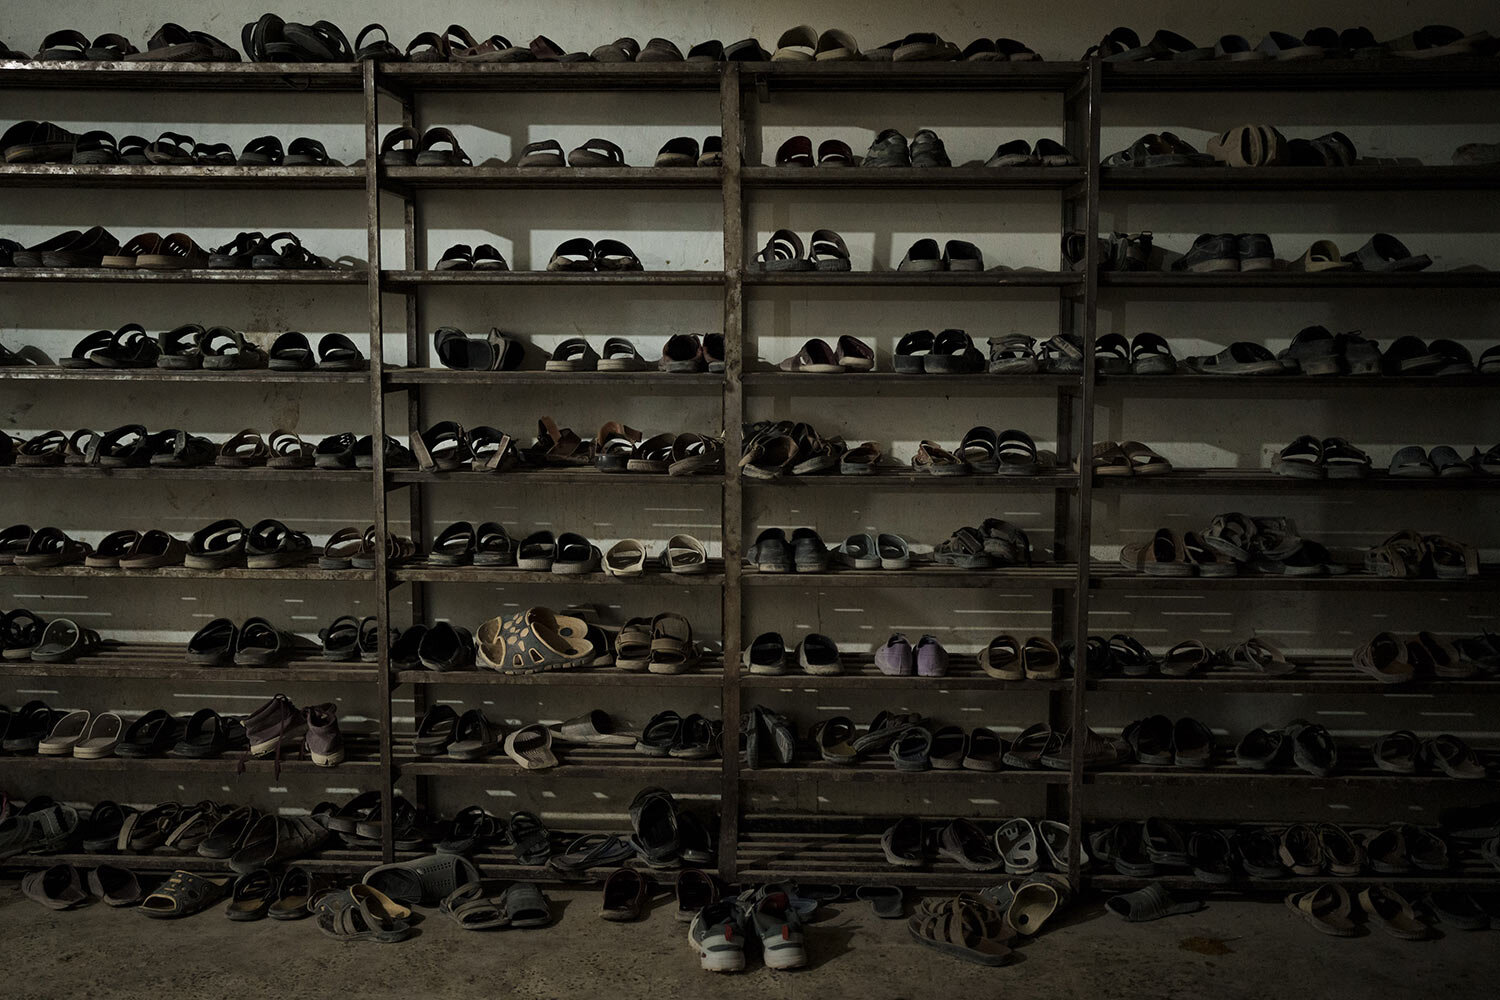 Shoes of students are placed at the entrance of the dining hall of the Khatamul Anbiya madrasa in Kabul, Afghanistan, Tuesday, Sept. 28, 2021. (AP Photo/Felipe Dana)